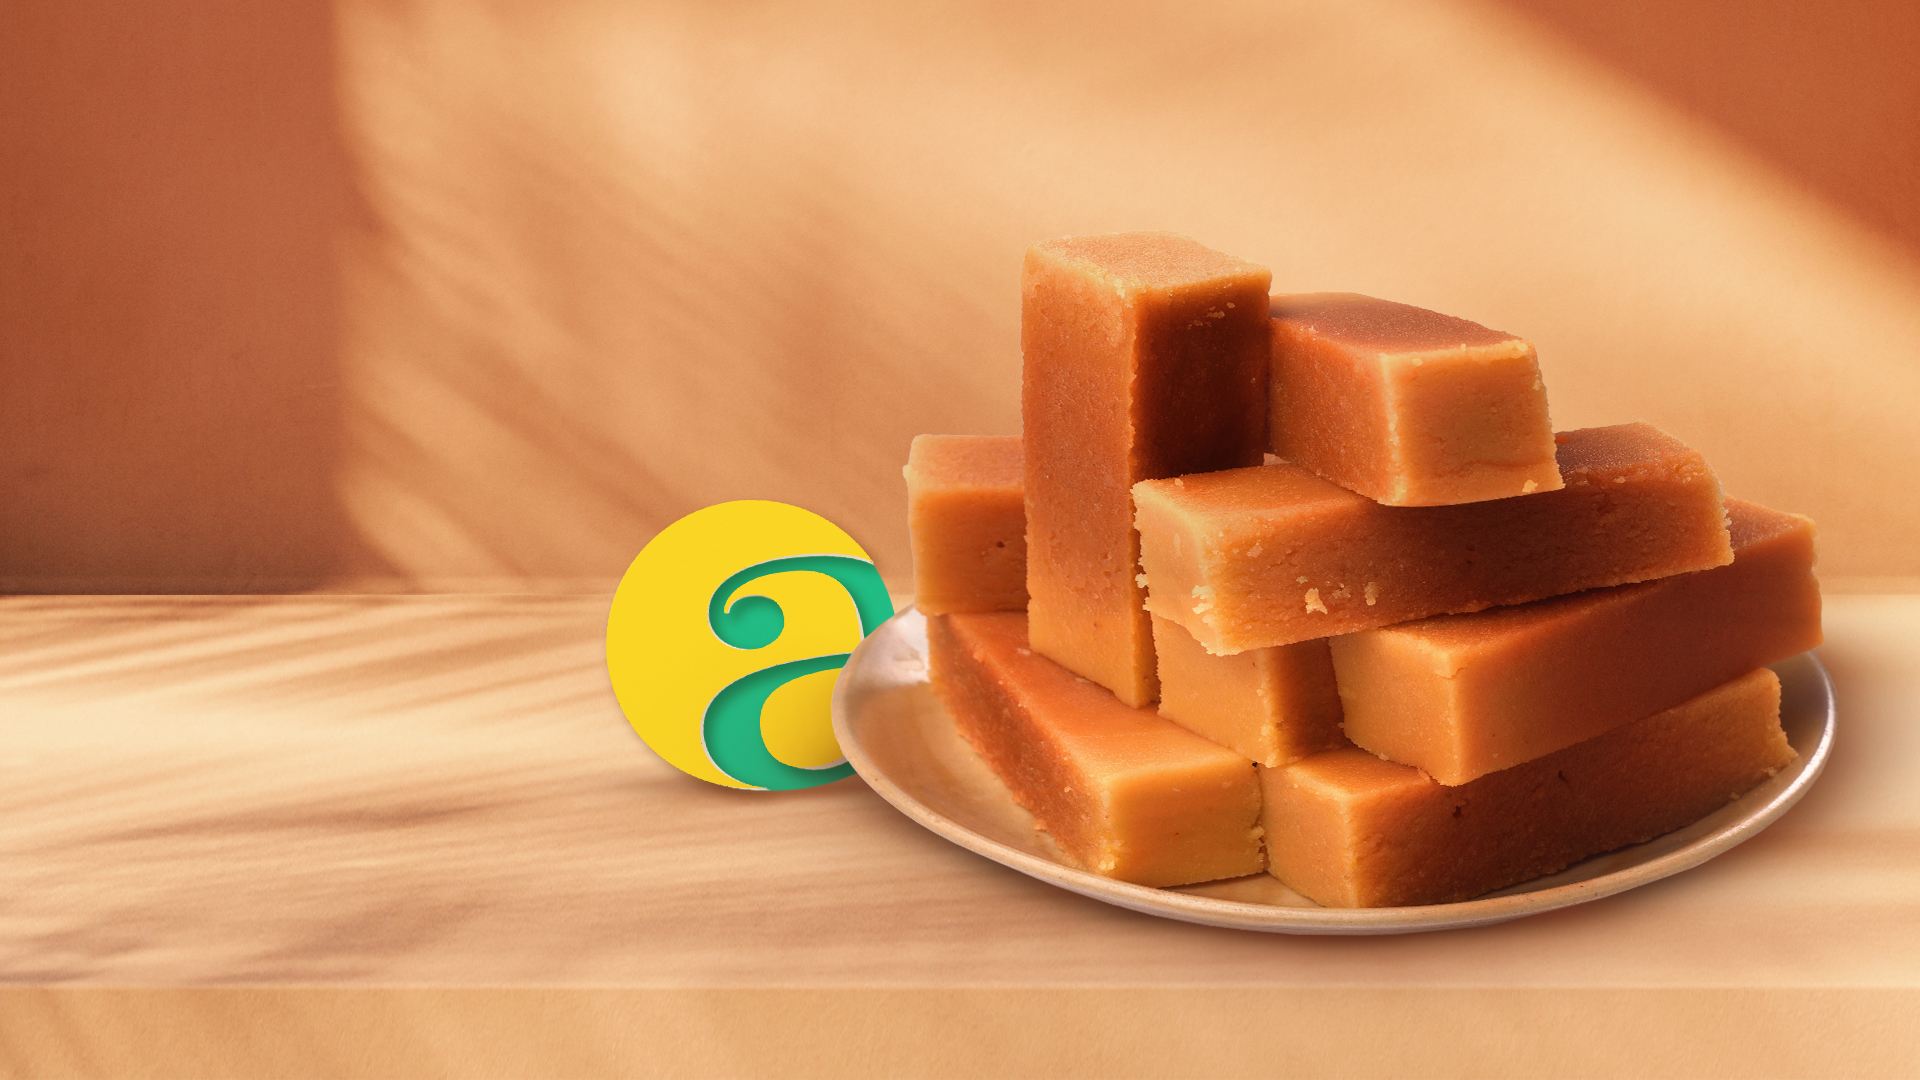 Why is Ghee Mysore Pak Considered a Classic Indian Sweet?